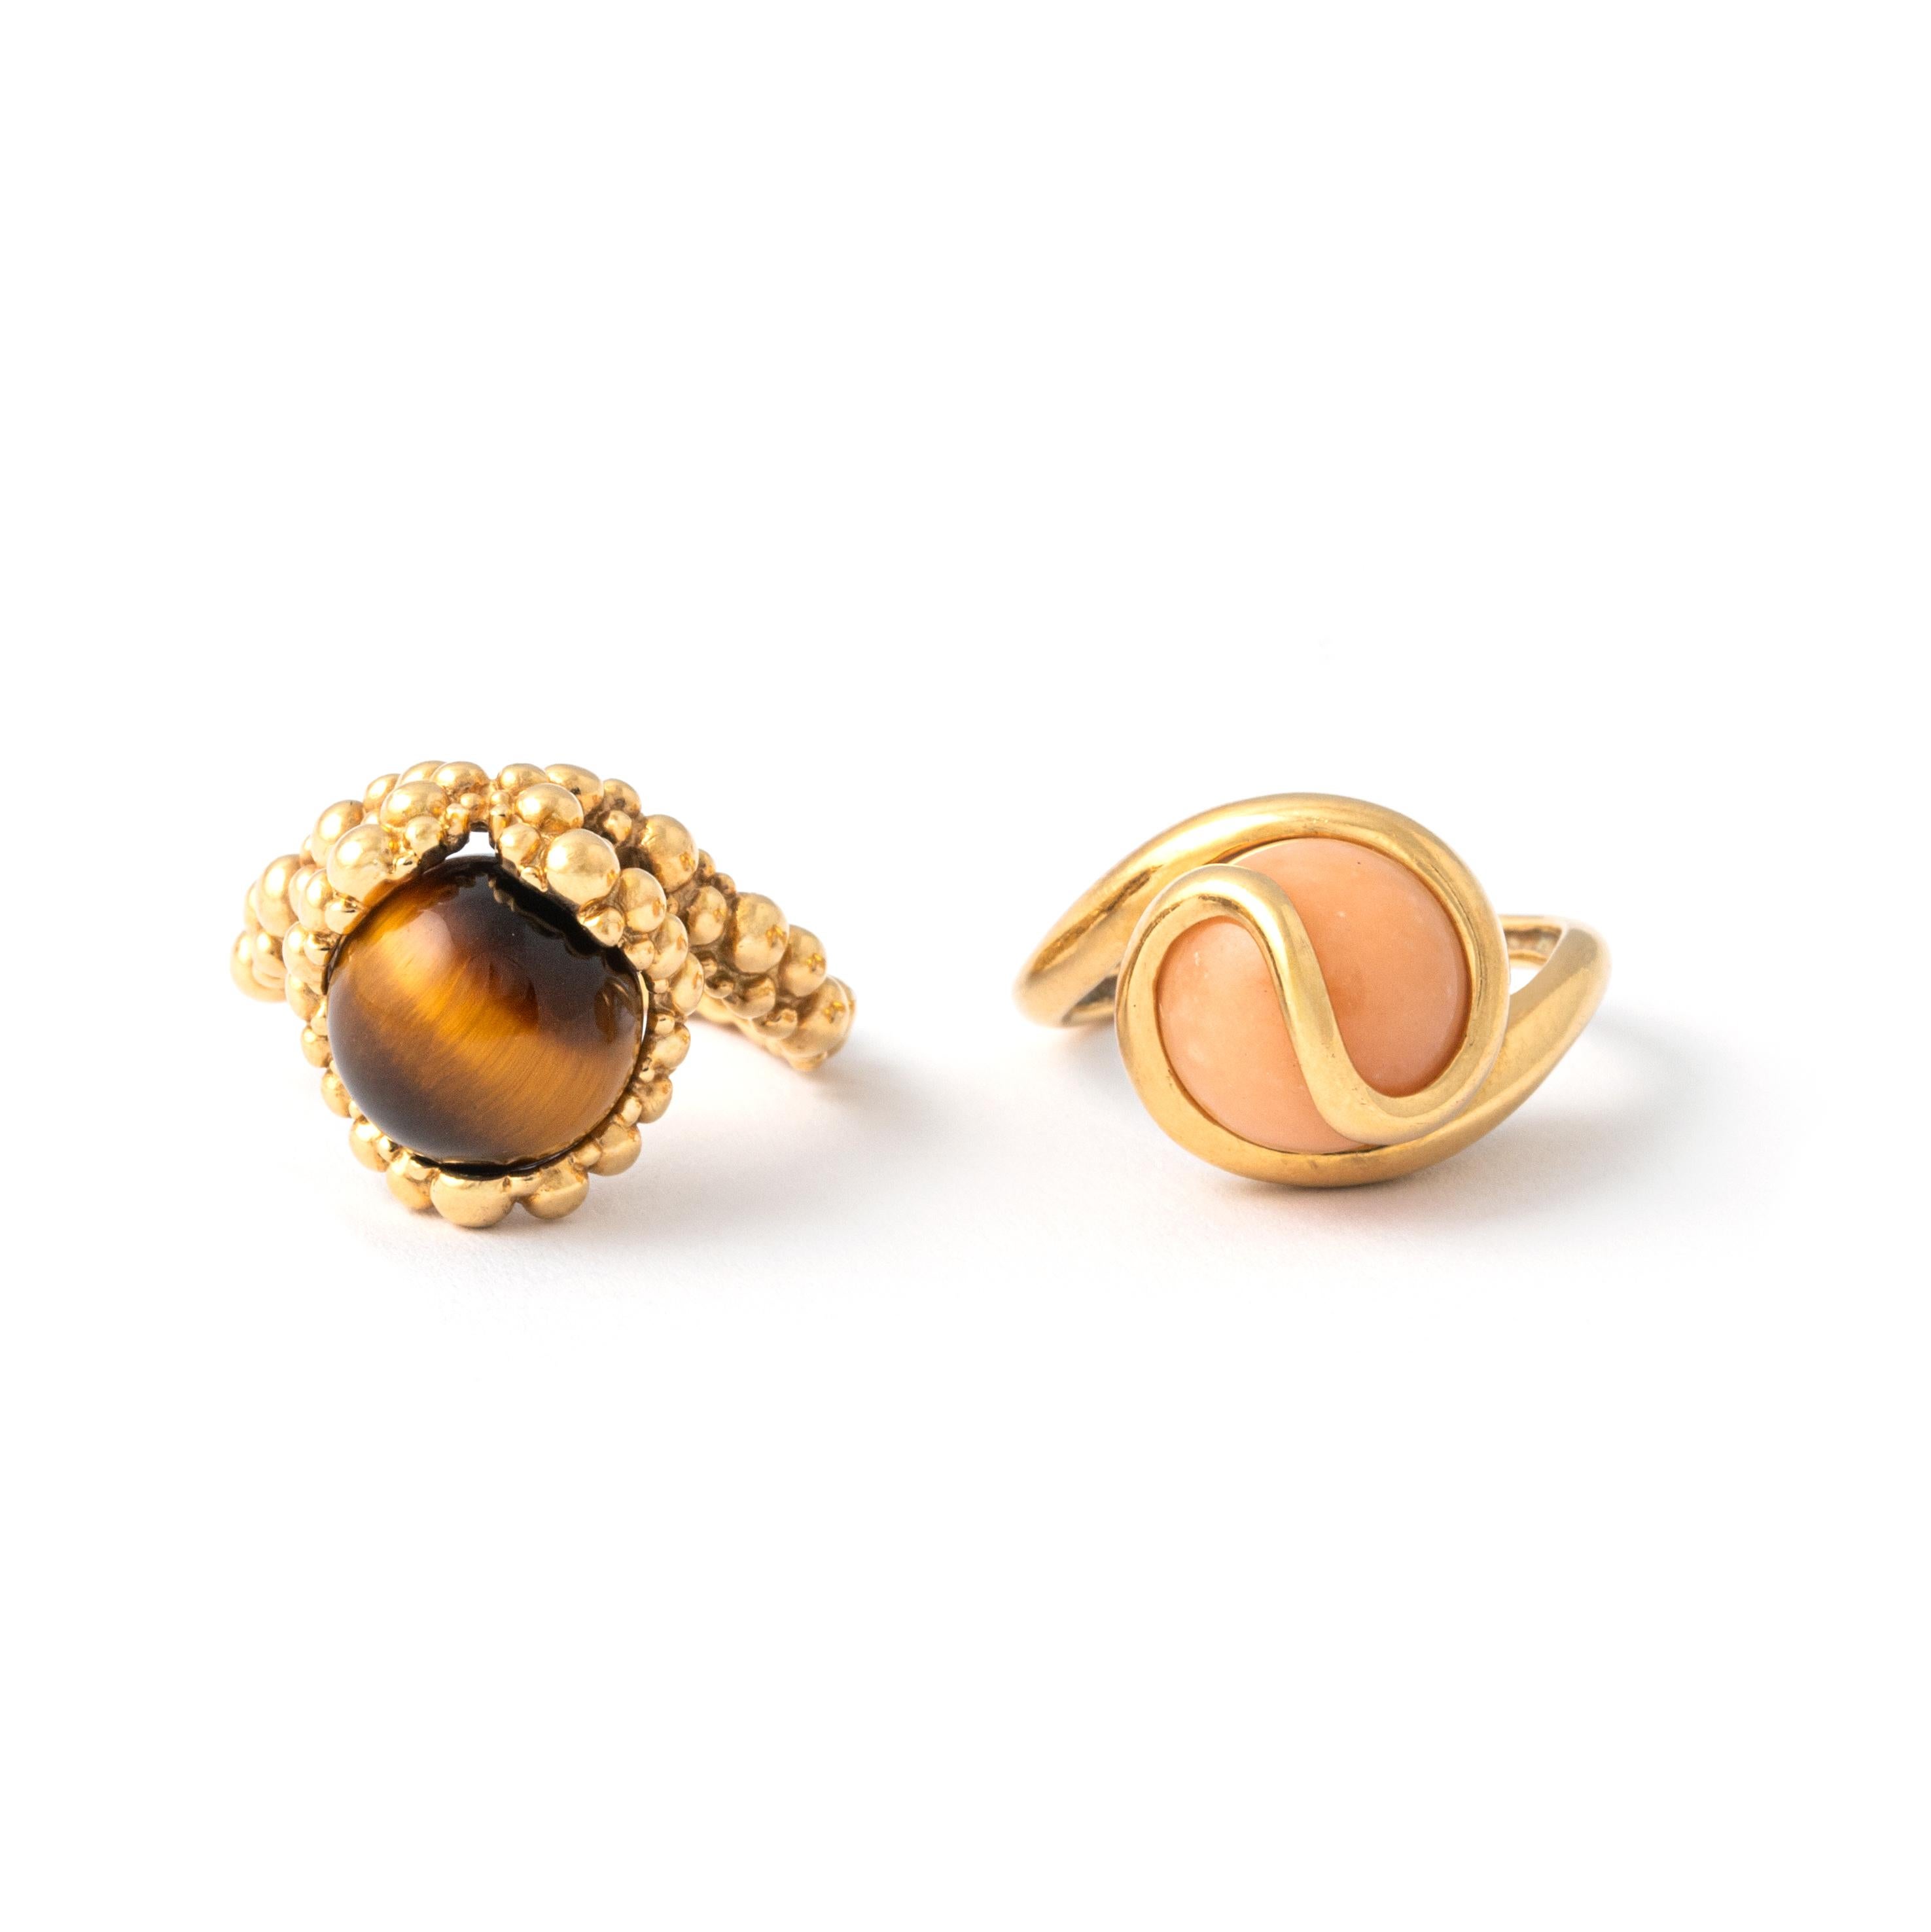 Two Rings in 18K Yellow Gold and two beads in hard stone including ne Tiger's Eye.

By Gilbert Albert.

Immerse yourself in the exquisite craftsmanship of Gilbert Albert with this unique set of Two Rings in 18K Yellow Gold adorned with two beads in